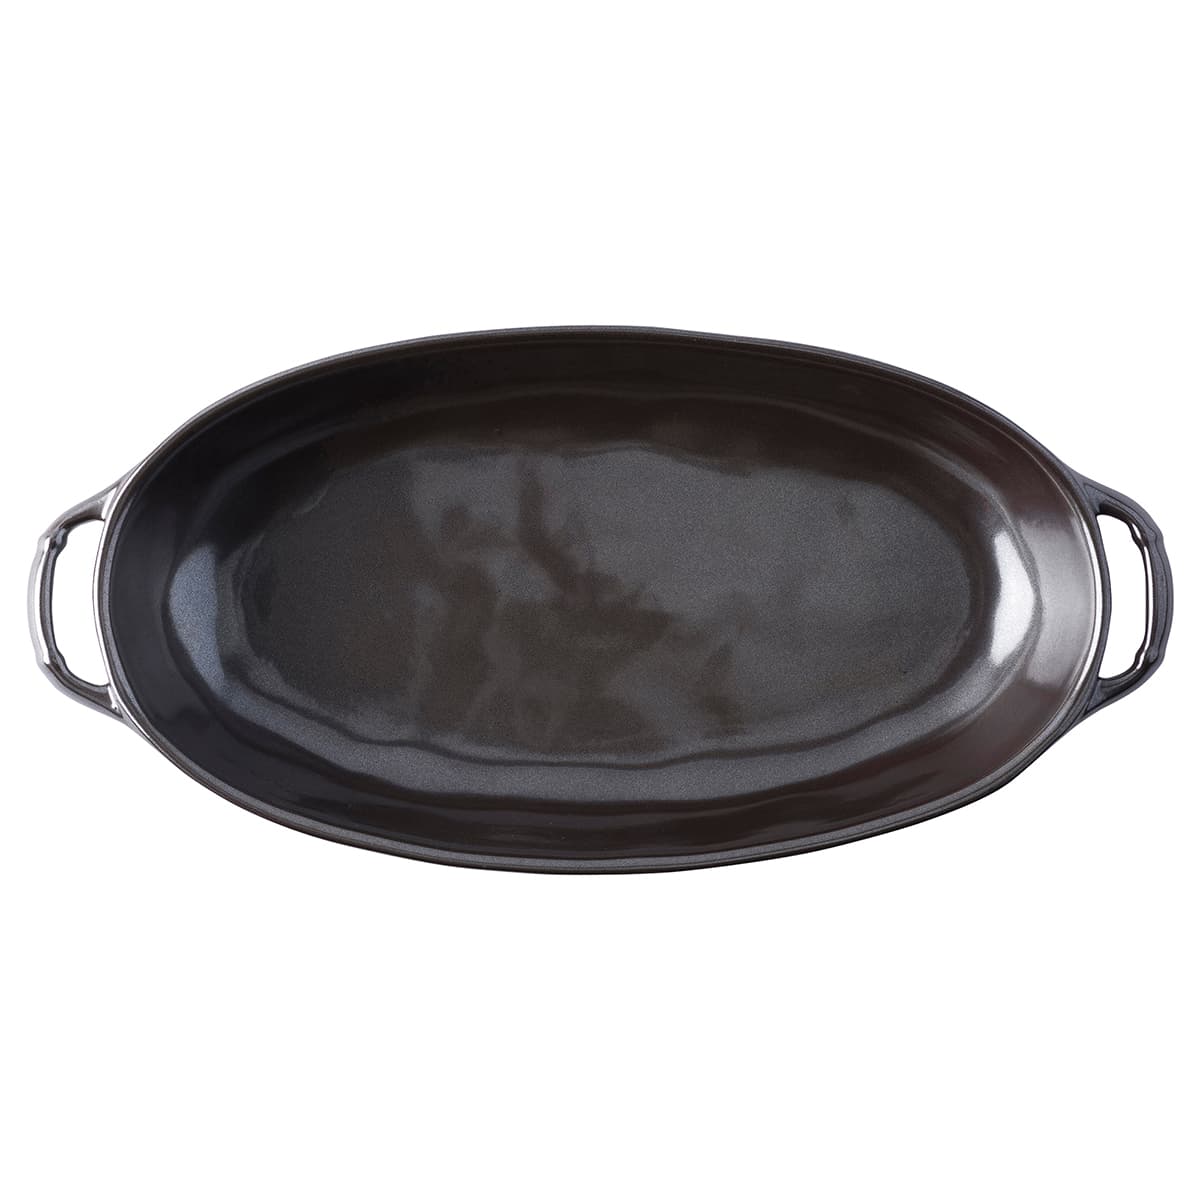 From our Pewter Stoneware Collection - Straight from oven to table, your bubbling epicurean masterpiece will take center stage in our shimmering Pewter Stoneware baking dish.